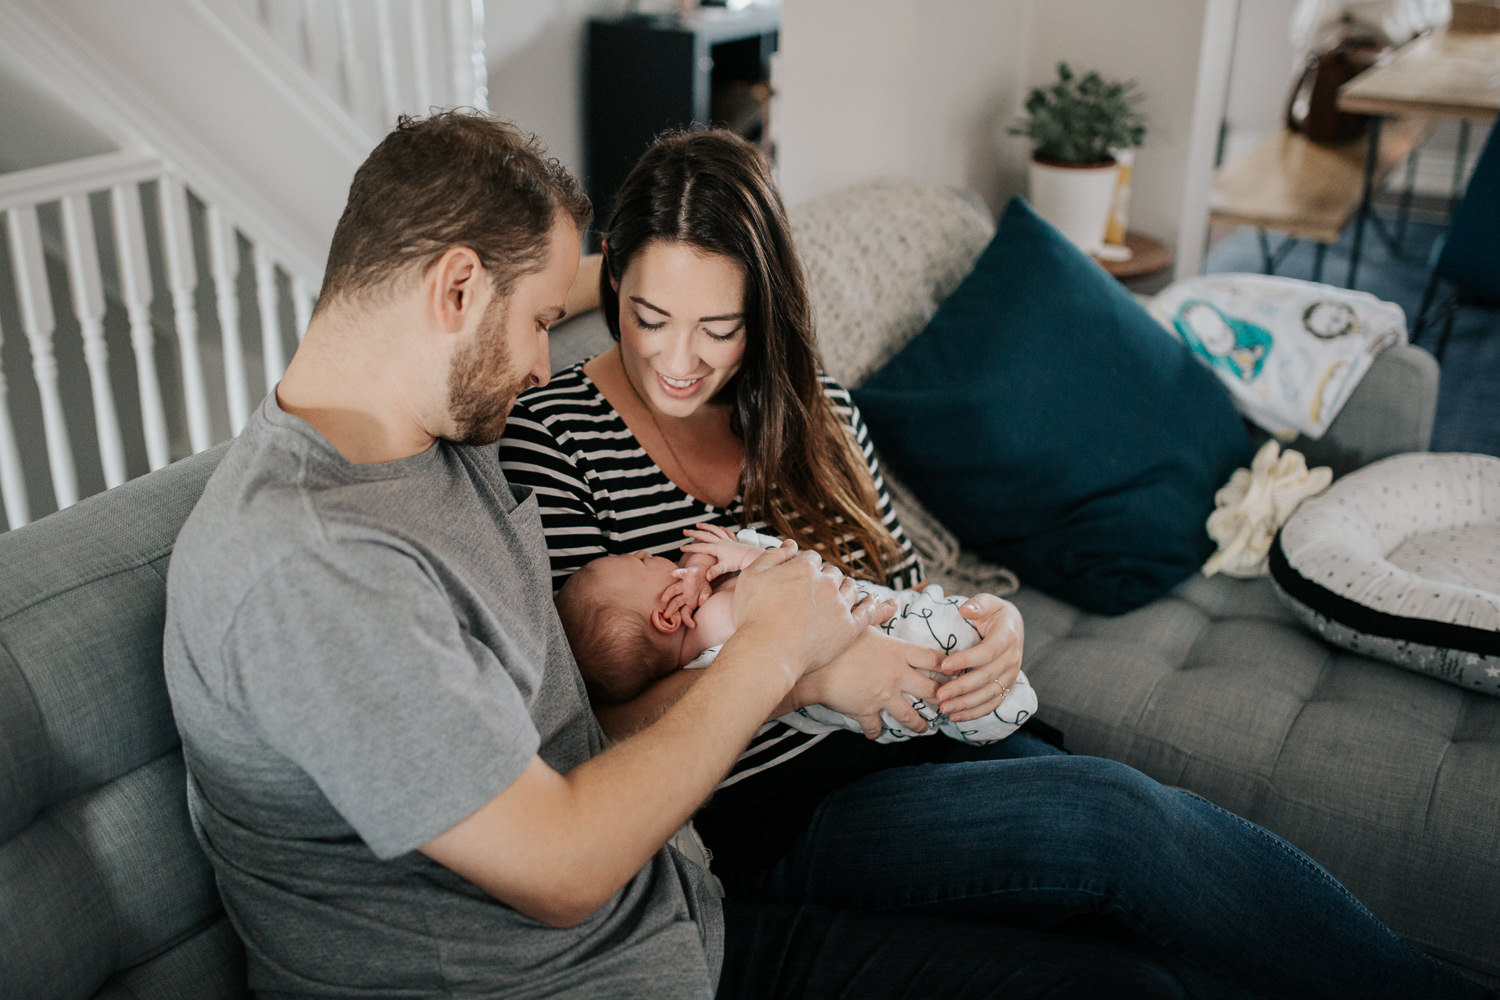 family of 3, new parents cuddle on couch, mom holding 2 week old baby girl covered with black and white swaddle, dad embracing wife and daughter - GTA Lifestyle Photos